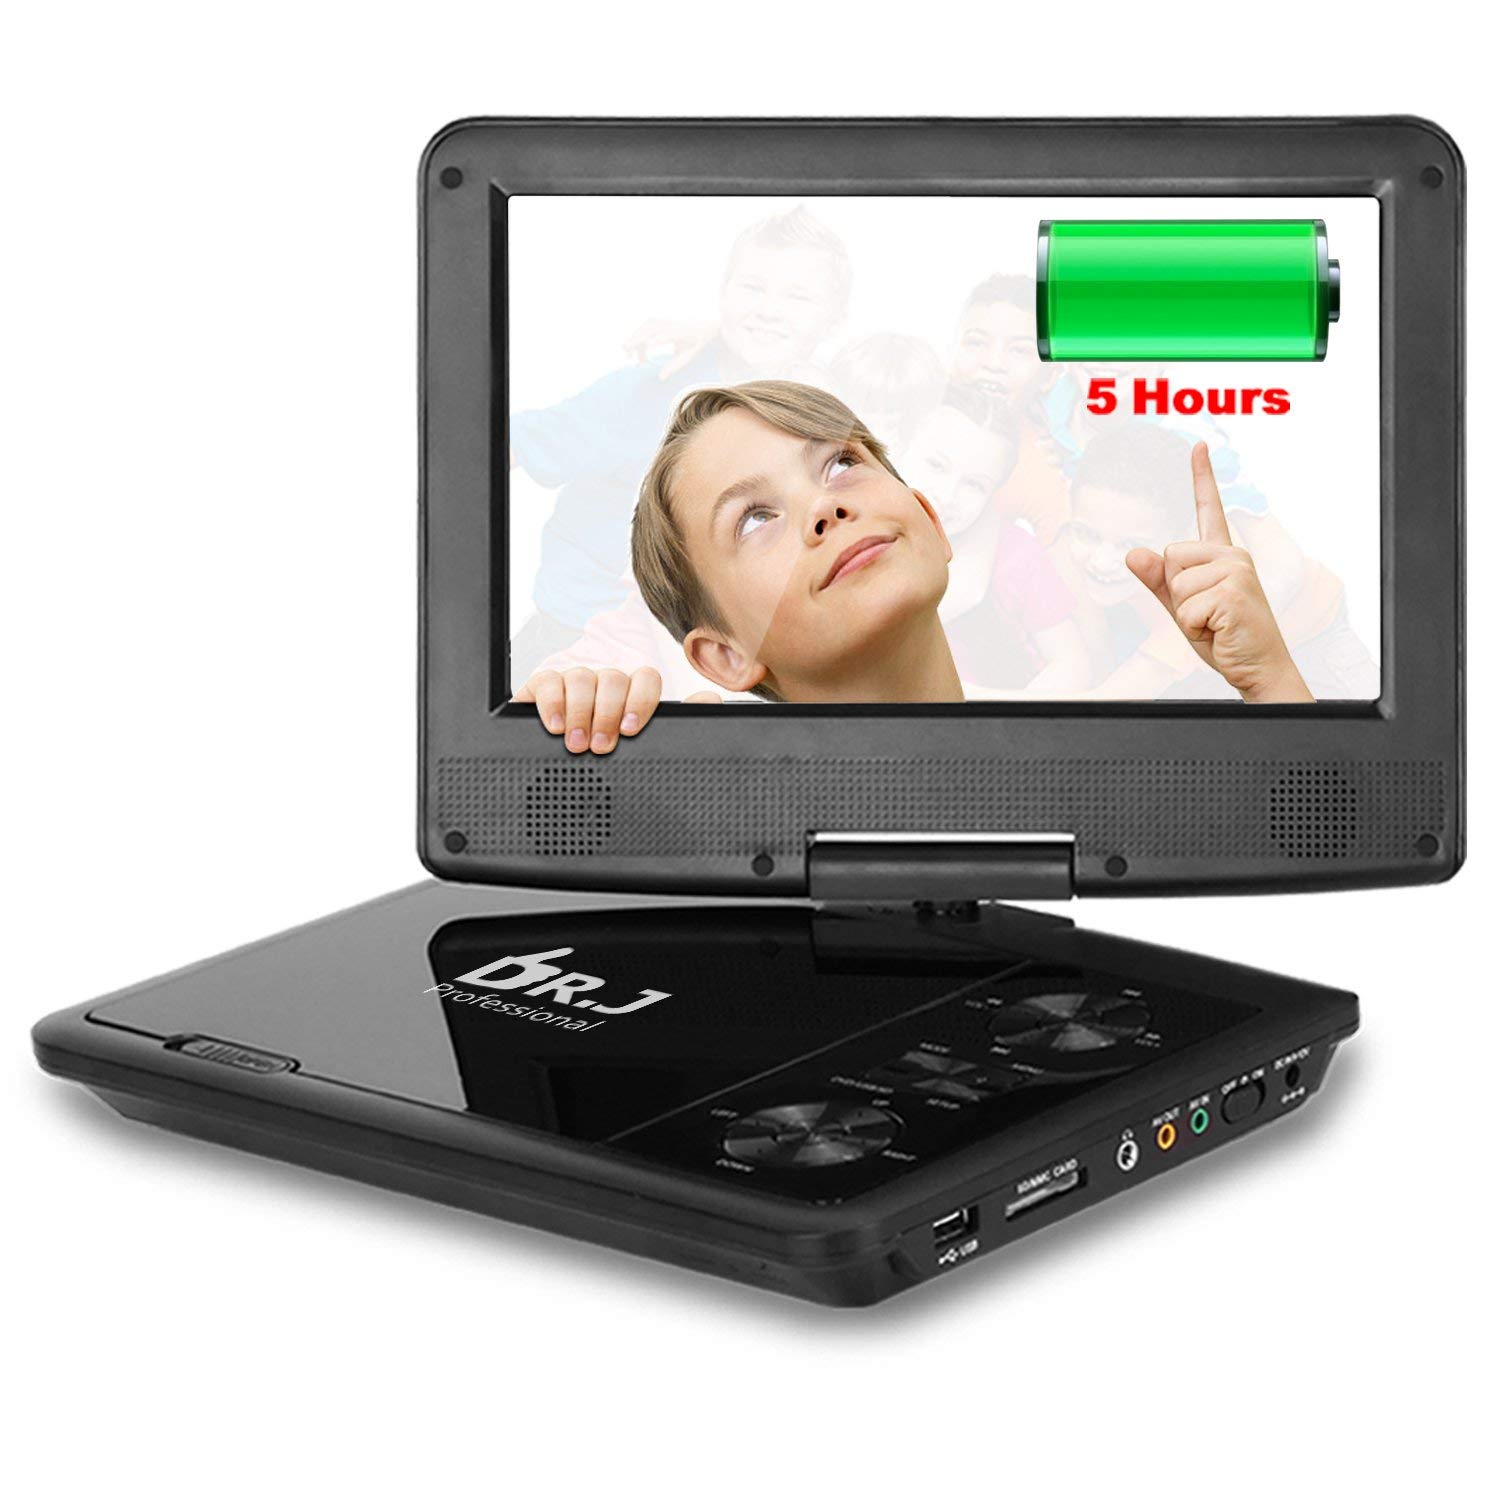 Top Five Best Portable DVD Players | The Bronx Daily | Bronx.com